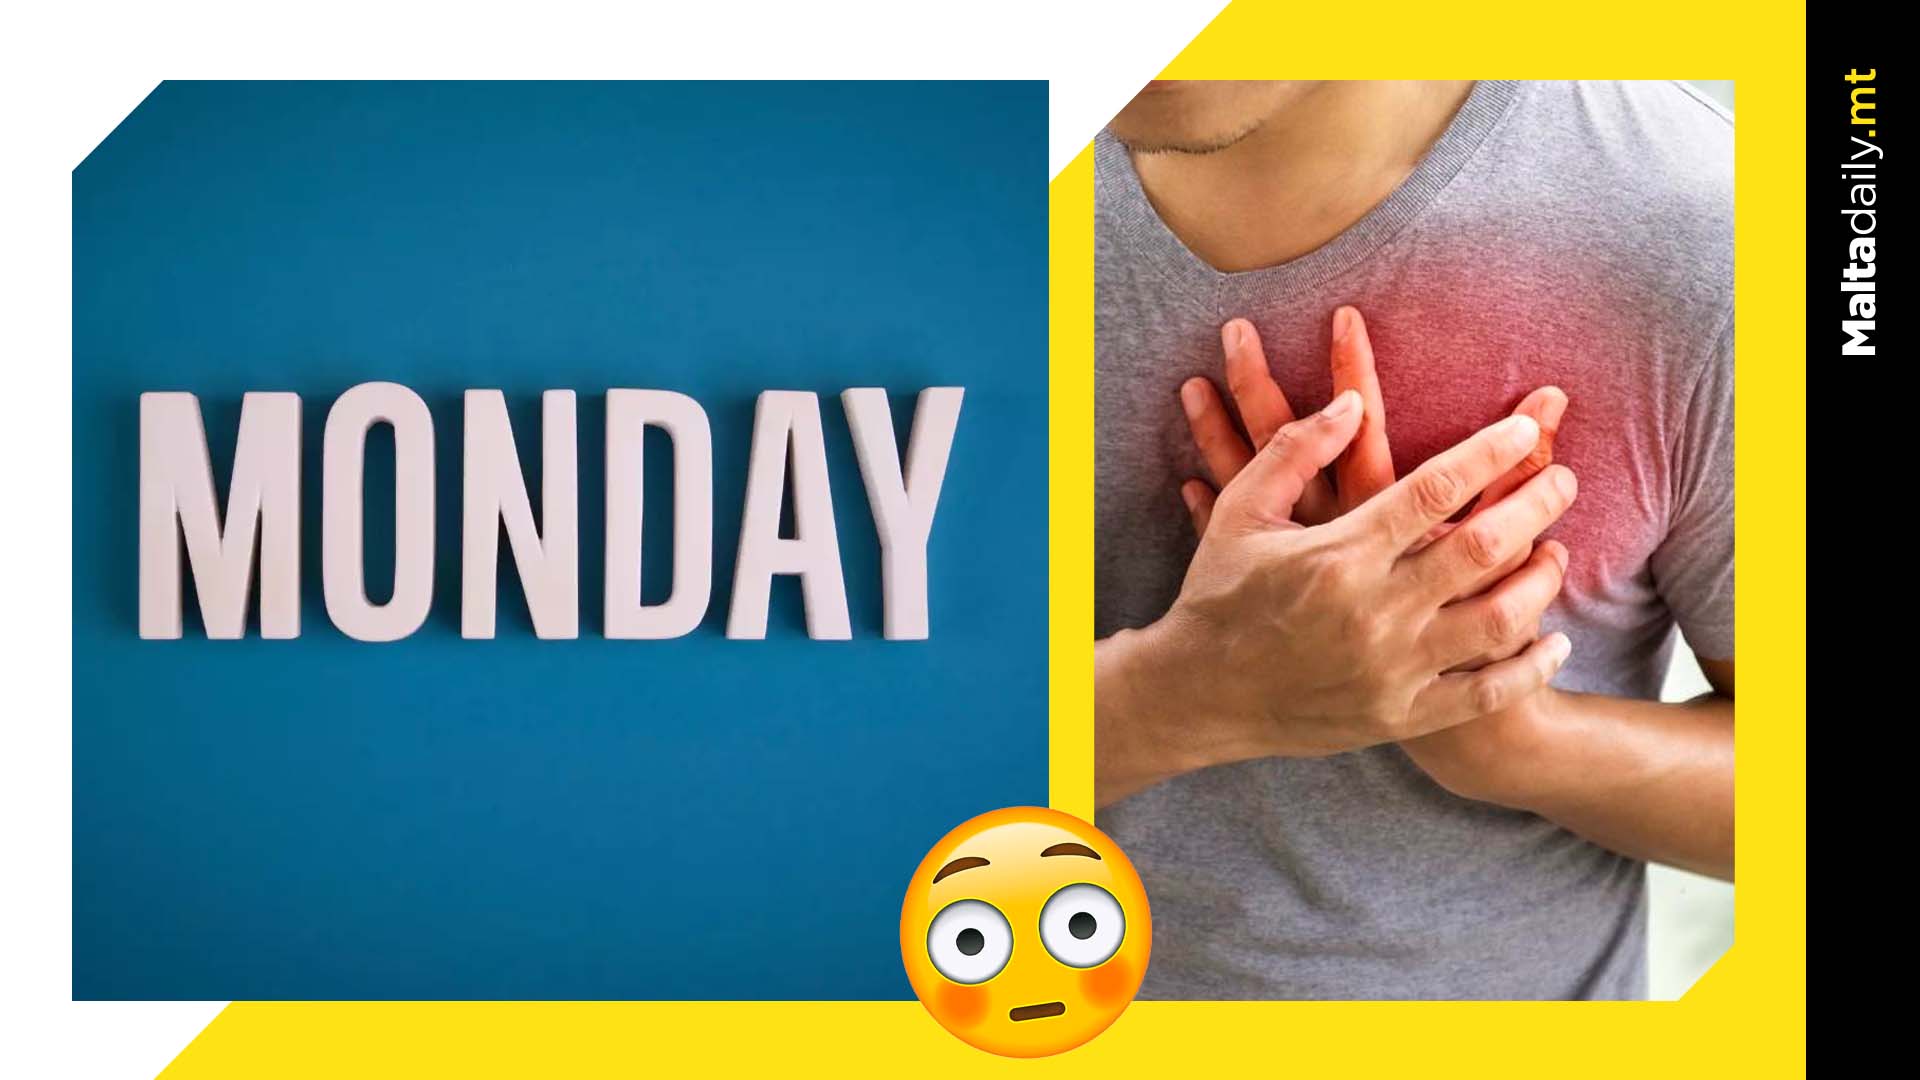 Worst heart attacks more likely to happen on Mondays